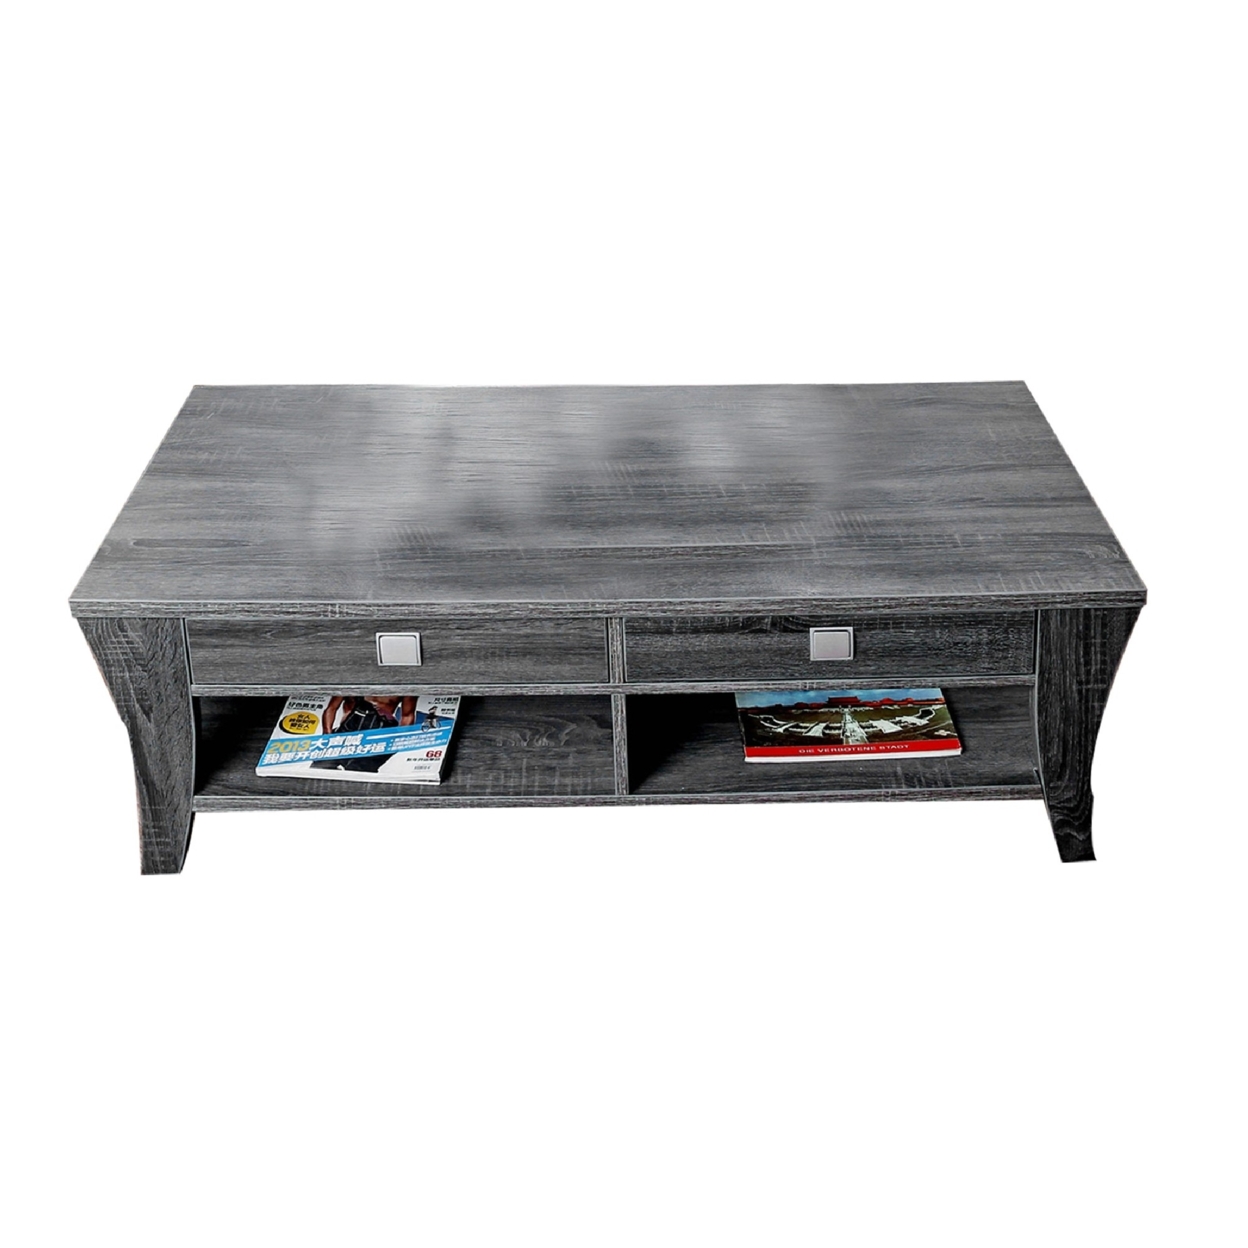 Low Rise Coffee Table With Drawers And Bottom Shelves, Gray- Saltoro Sherpi